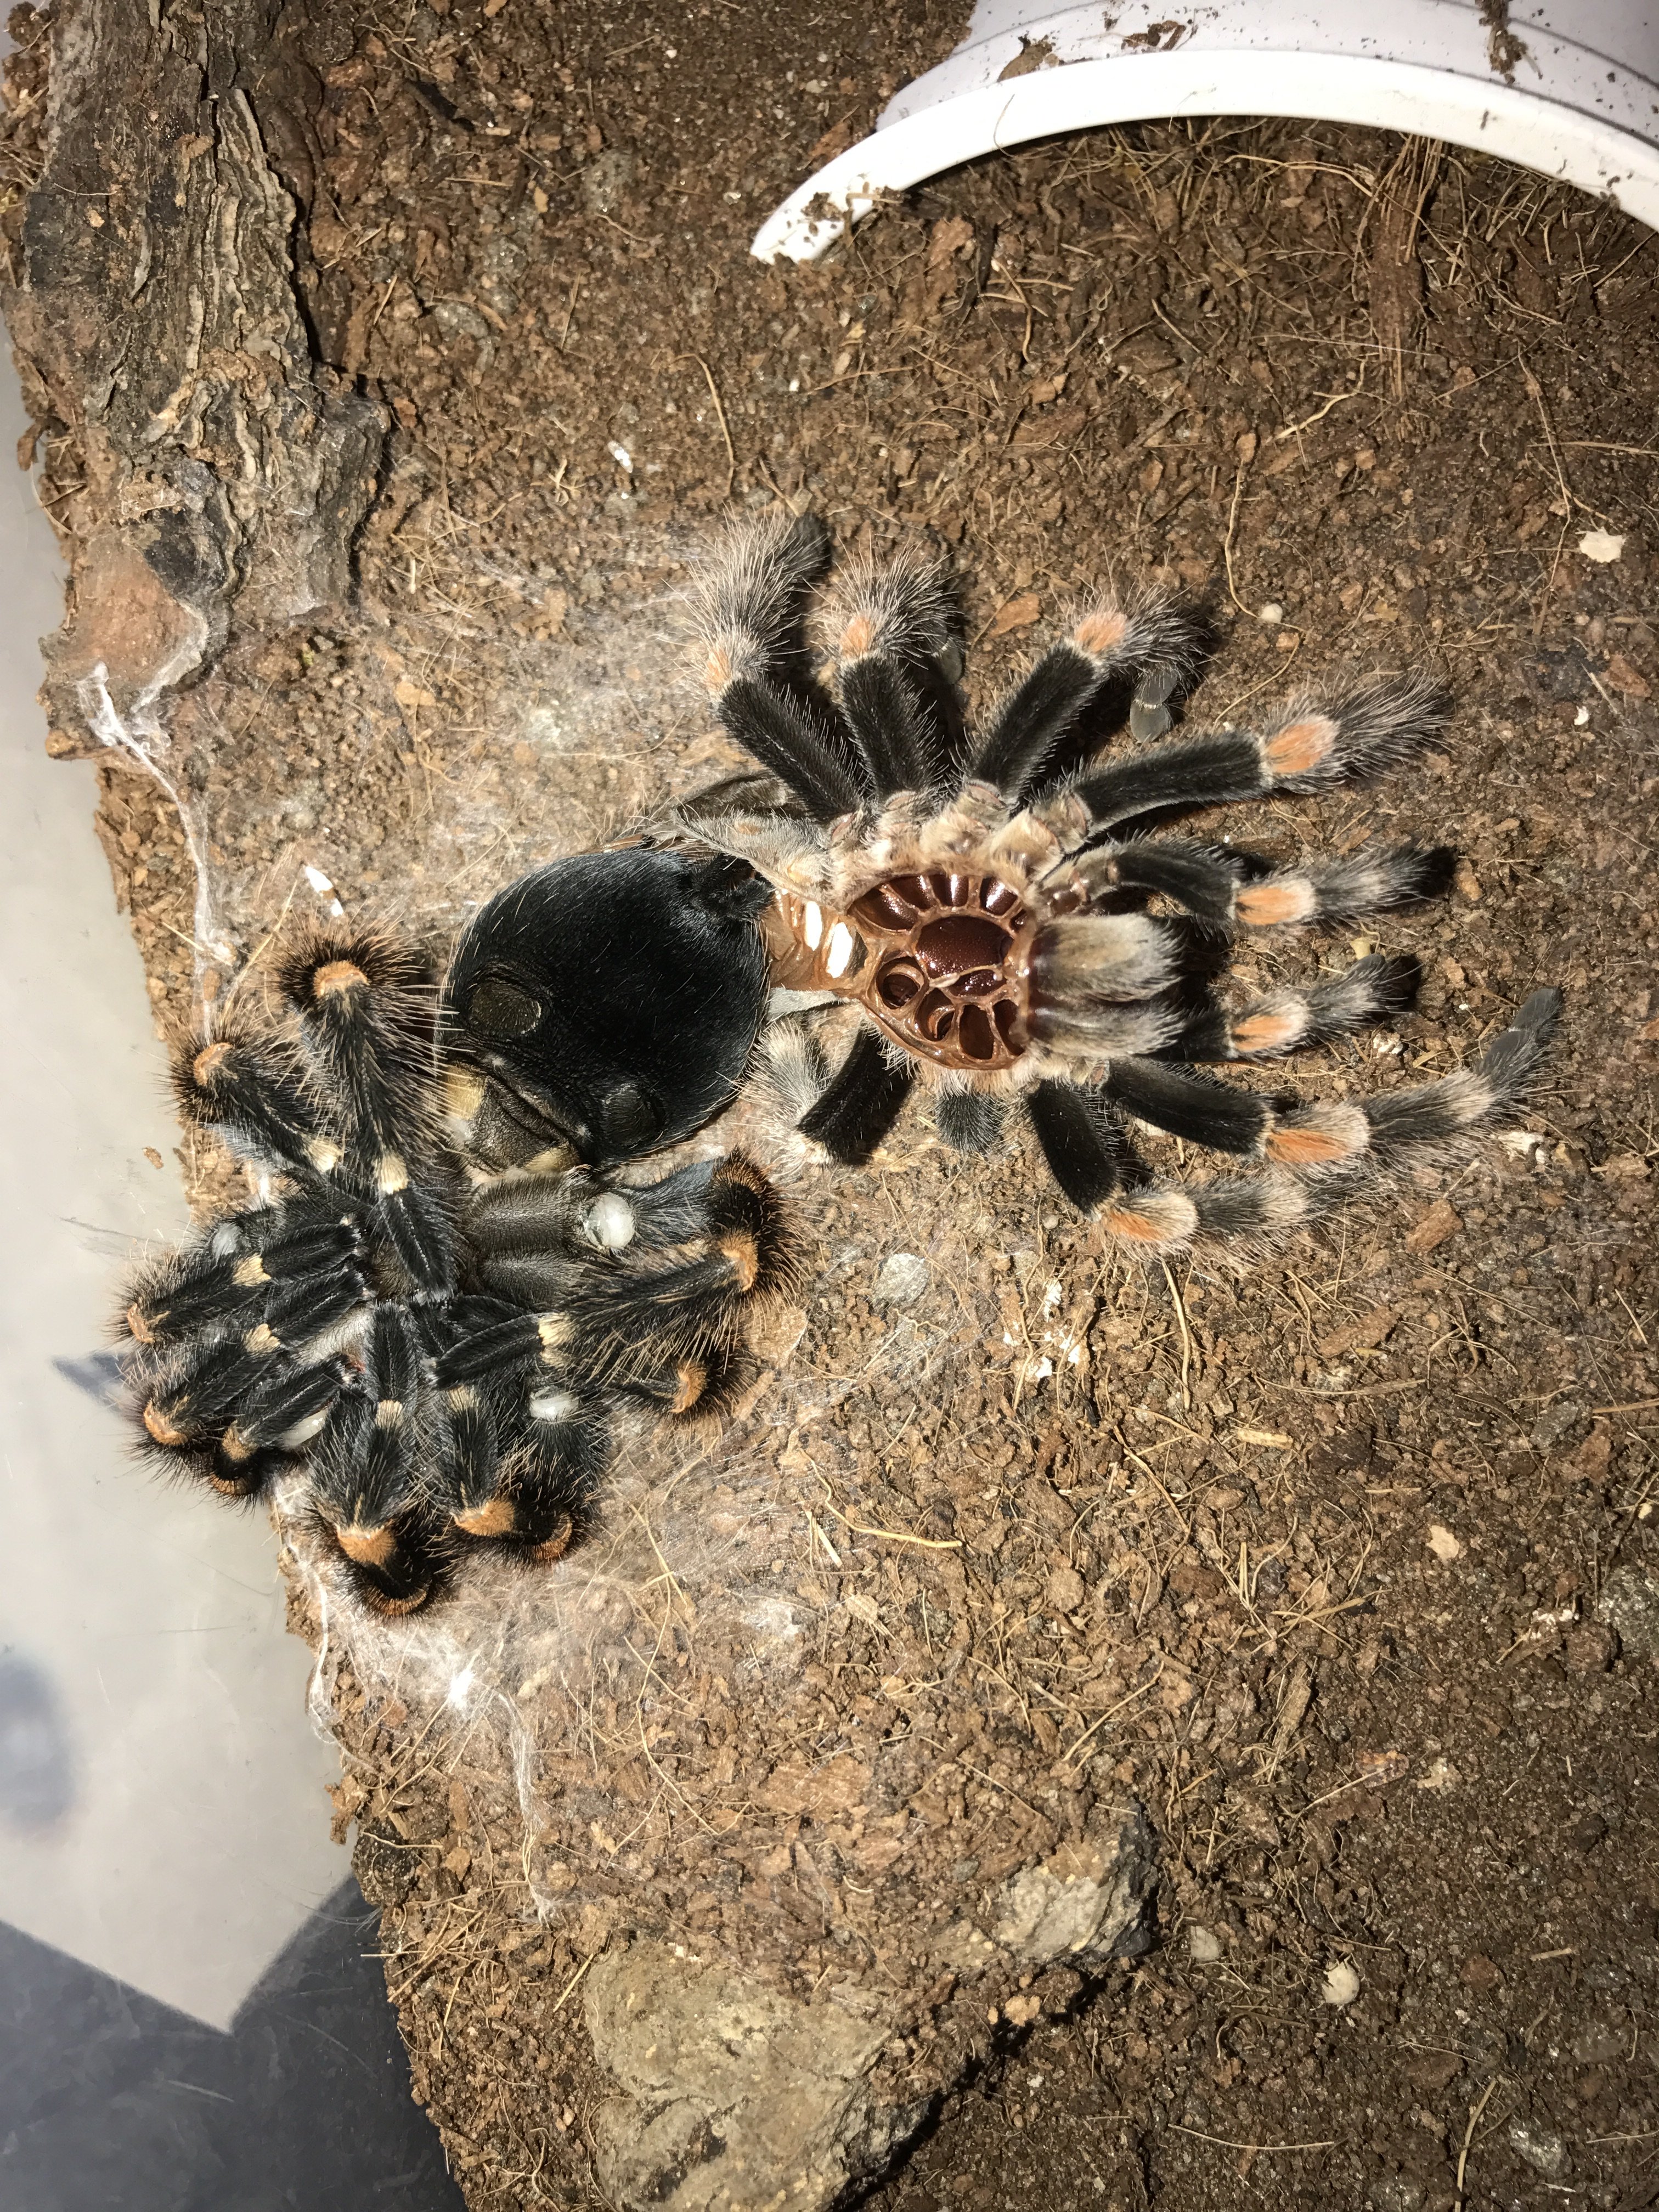 B smithi after molting